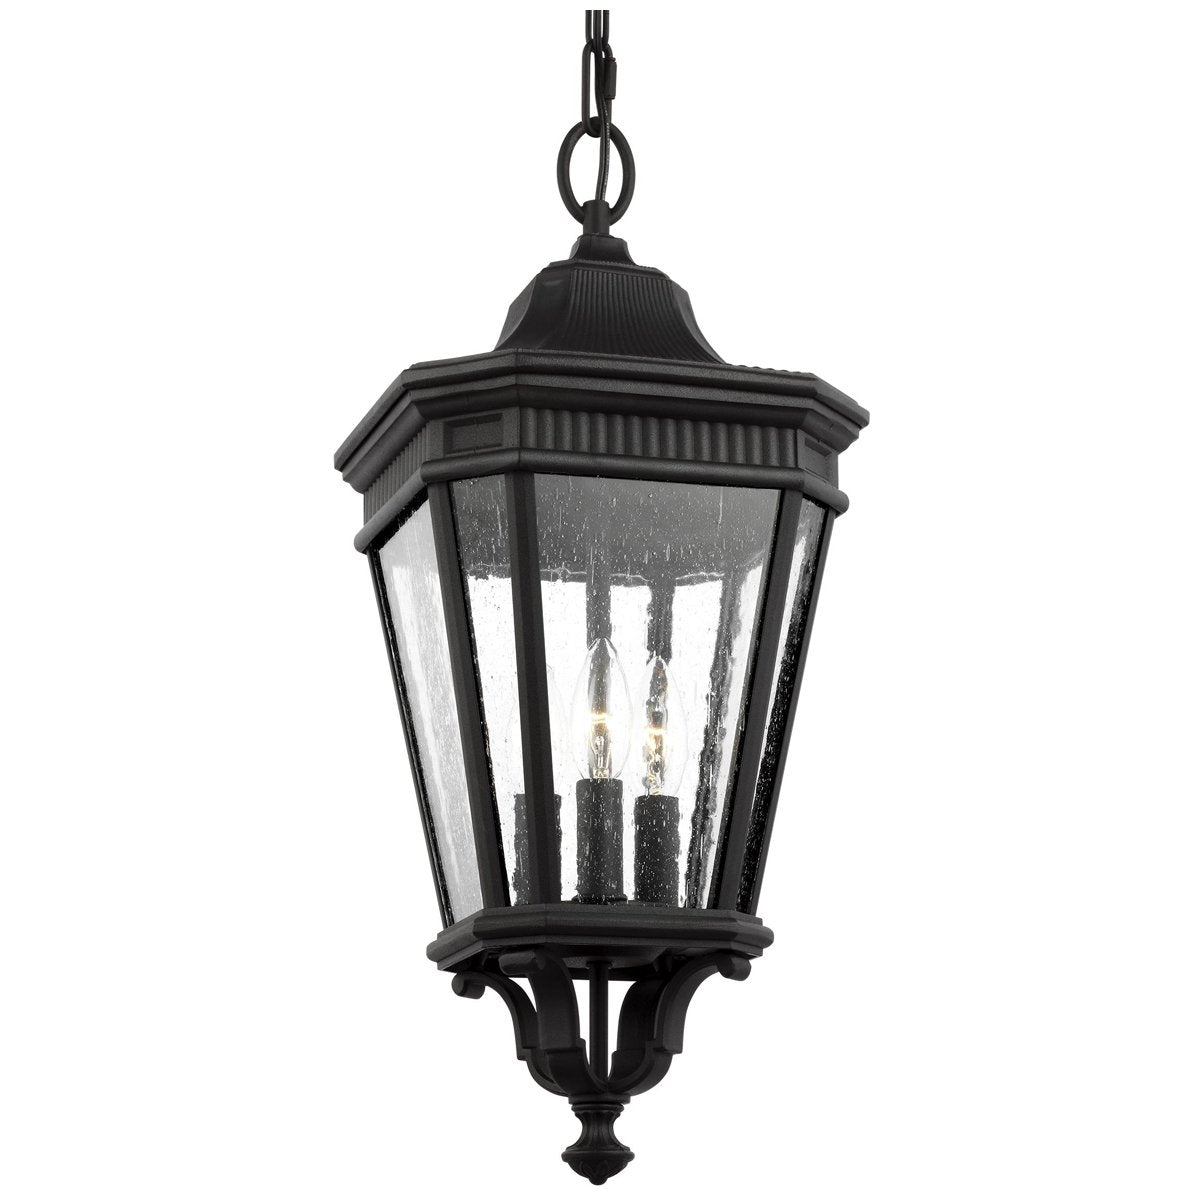 Feiss Cotswold Lane 3-Light Small Outdoor Hanging Lantern